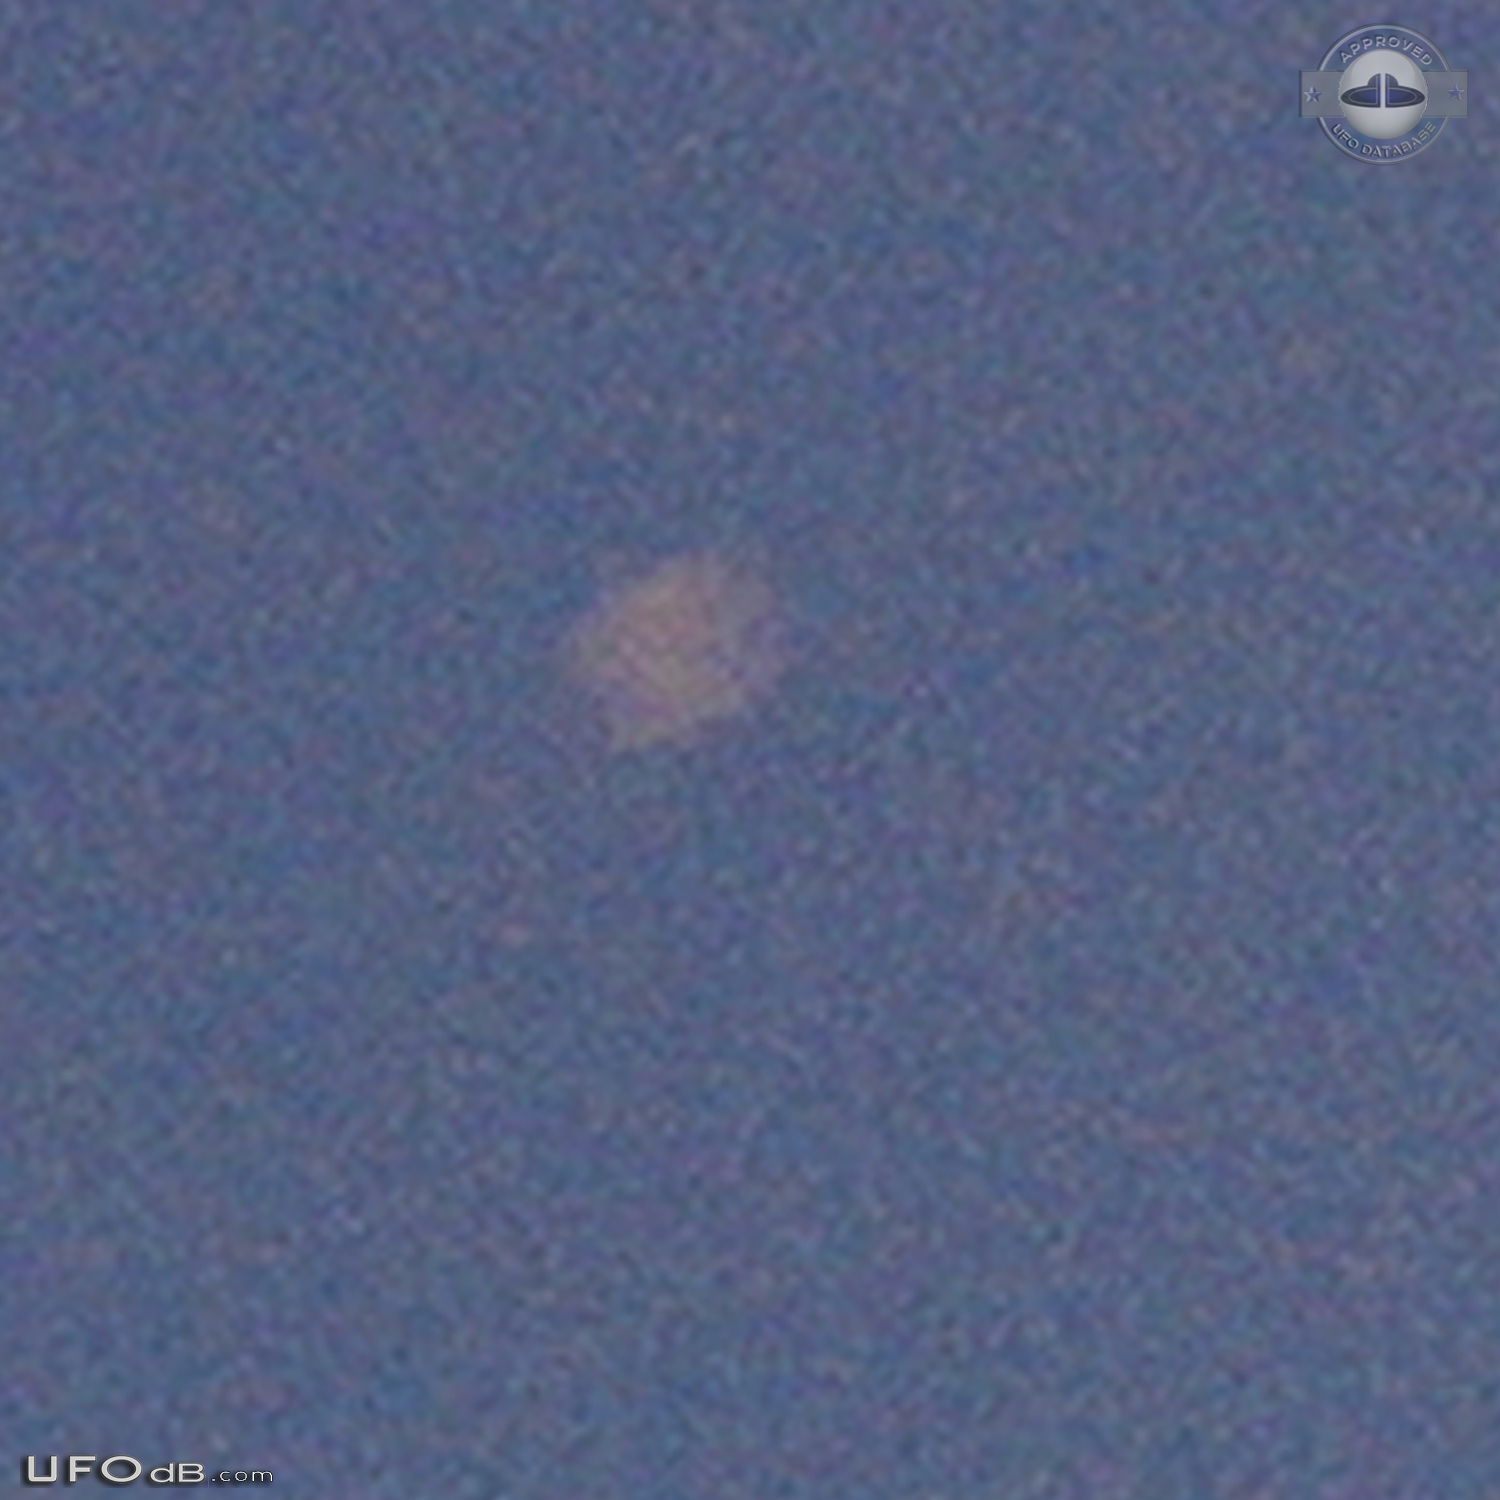 noticed a light passing under the moon in Pendleton Indiana USA 2015 UFO Picture #714-4